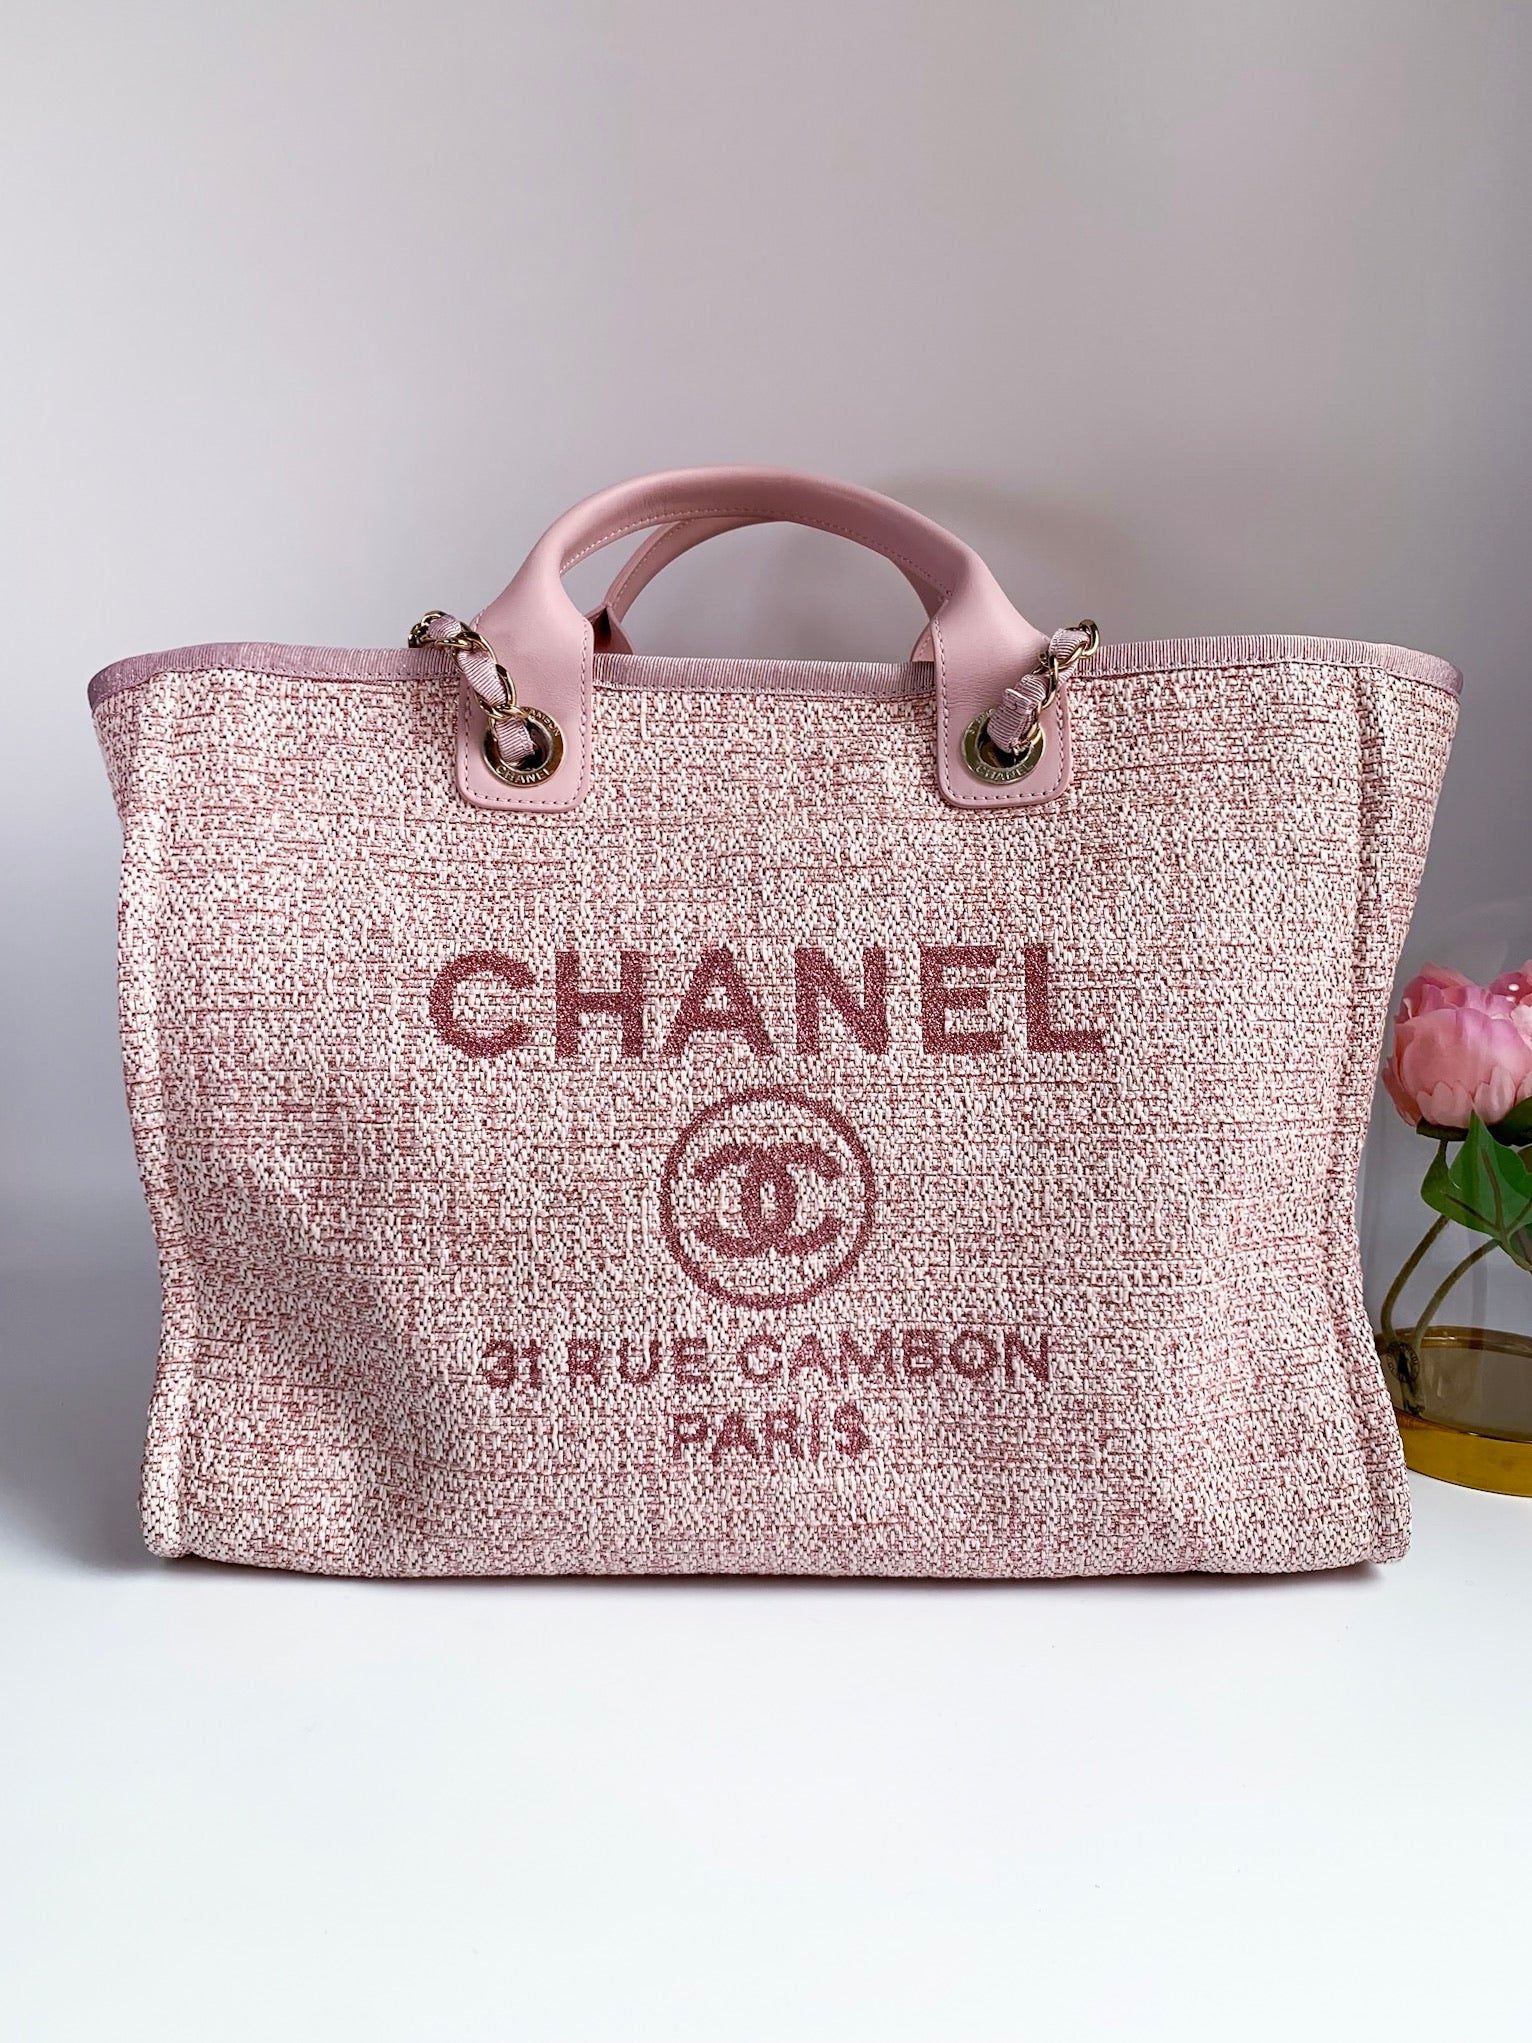 1000% AUTH! RARE! 🦄 CHANEL Pink Deauville 🦄 Medium Large Tote Bag